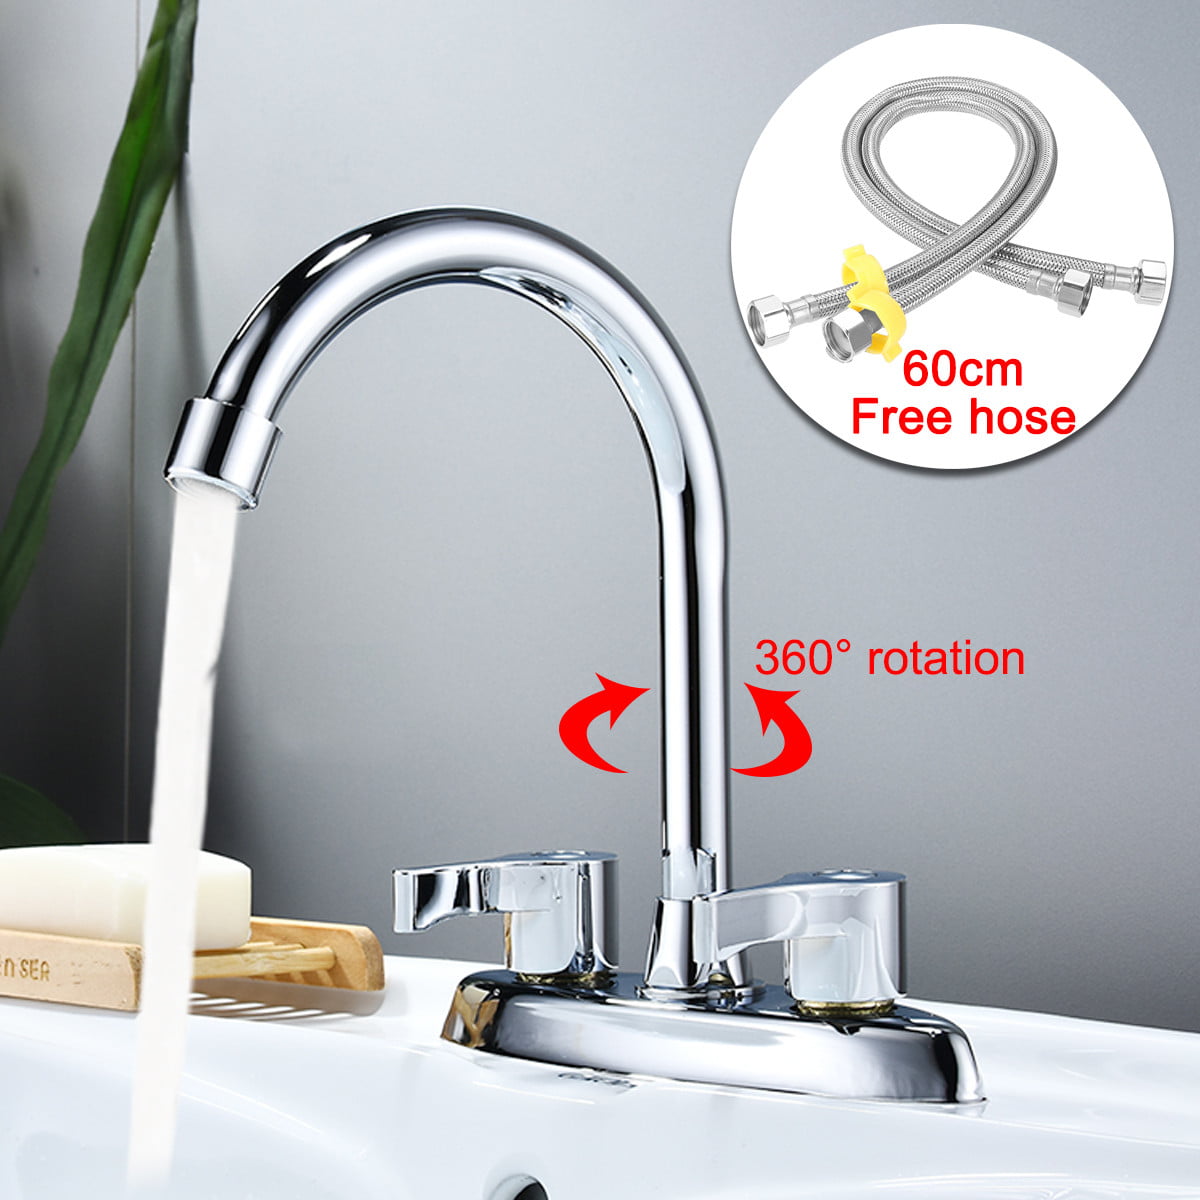 Stainless Steel Hot&Cold Mixer Water Taps Basin Kitchen Wash Basin Faucet Hose